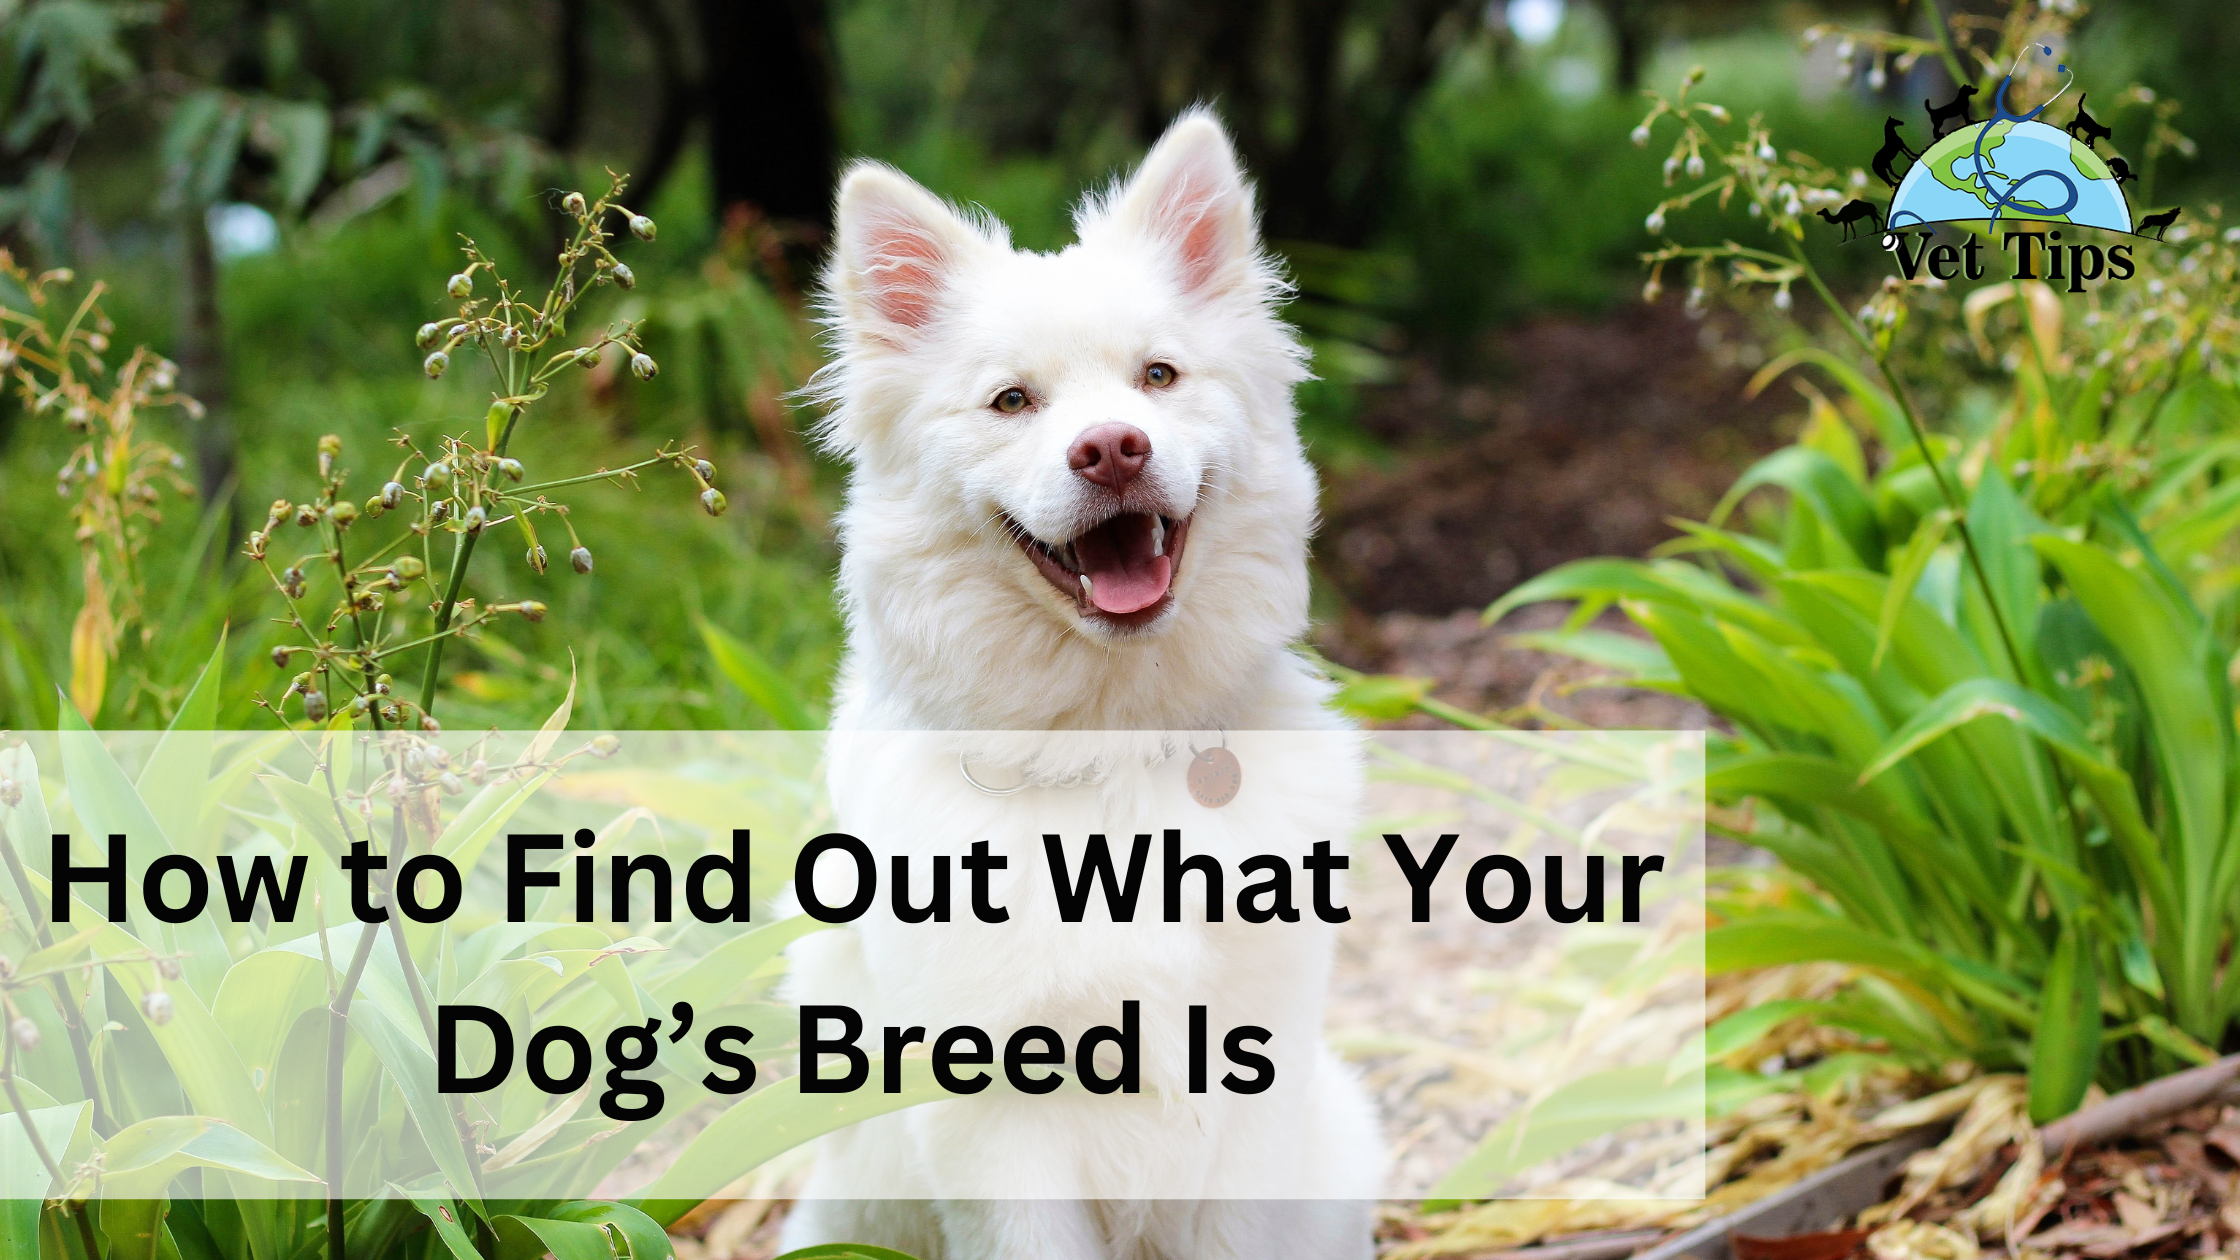 How to Find Out What Your Dog’s Breed Is